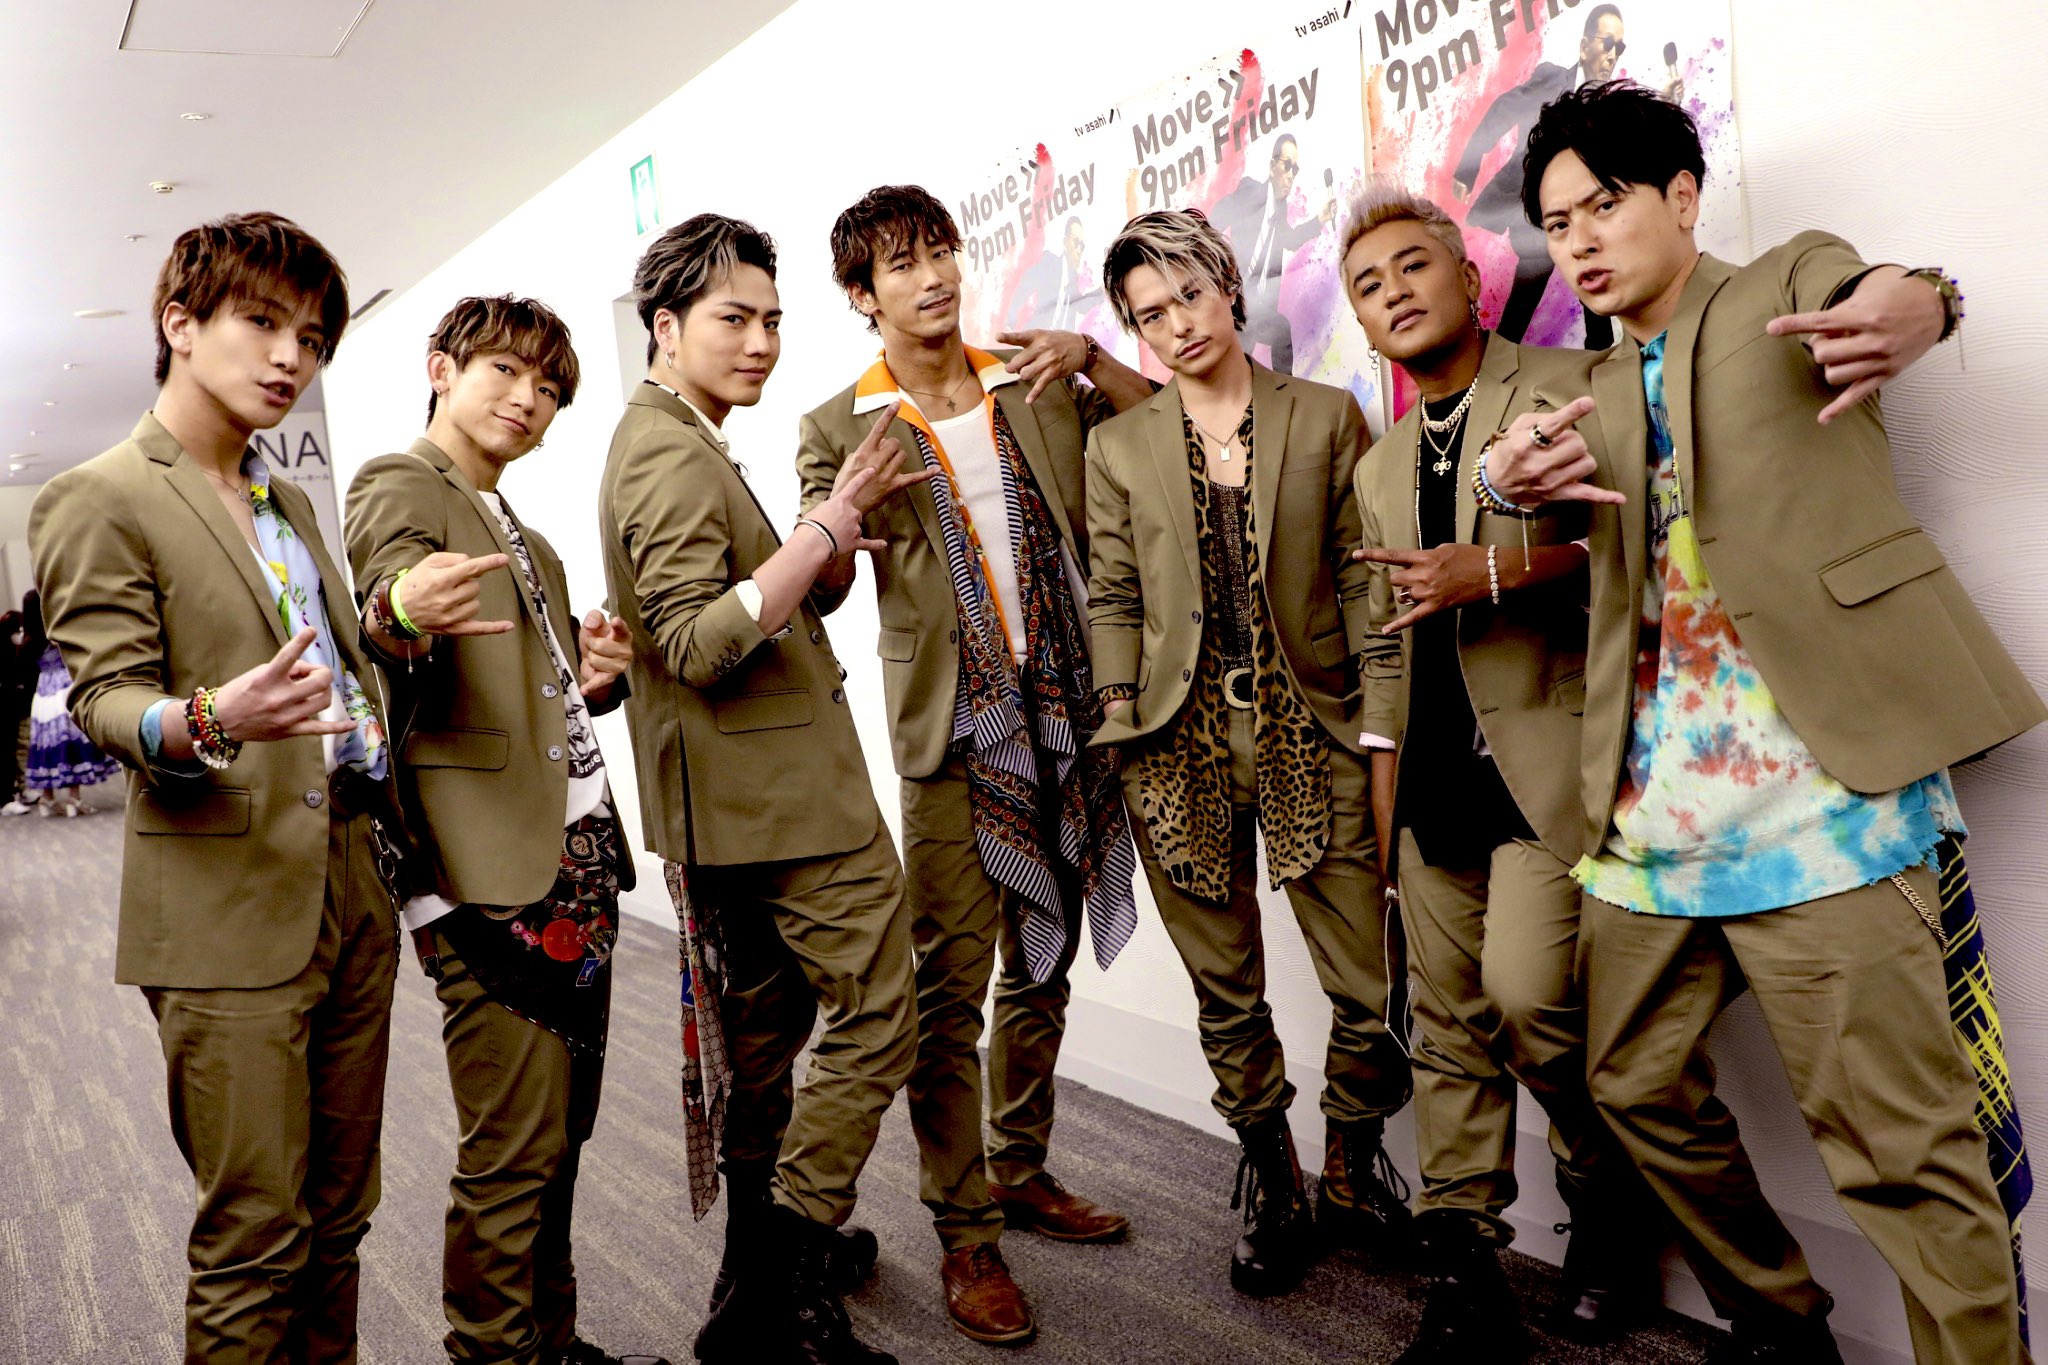 Mステ ありがとうございました 登坂広臣 三代目jsoulbrothers Jsb 話題の画像がわかるサイト